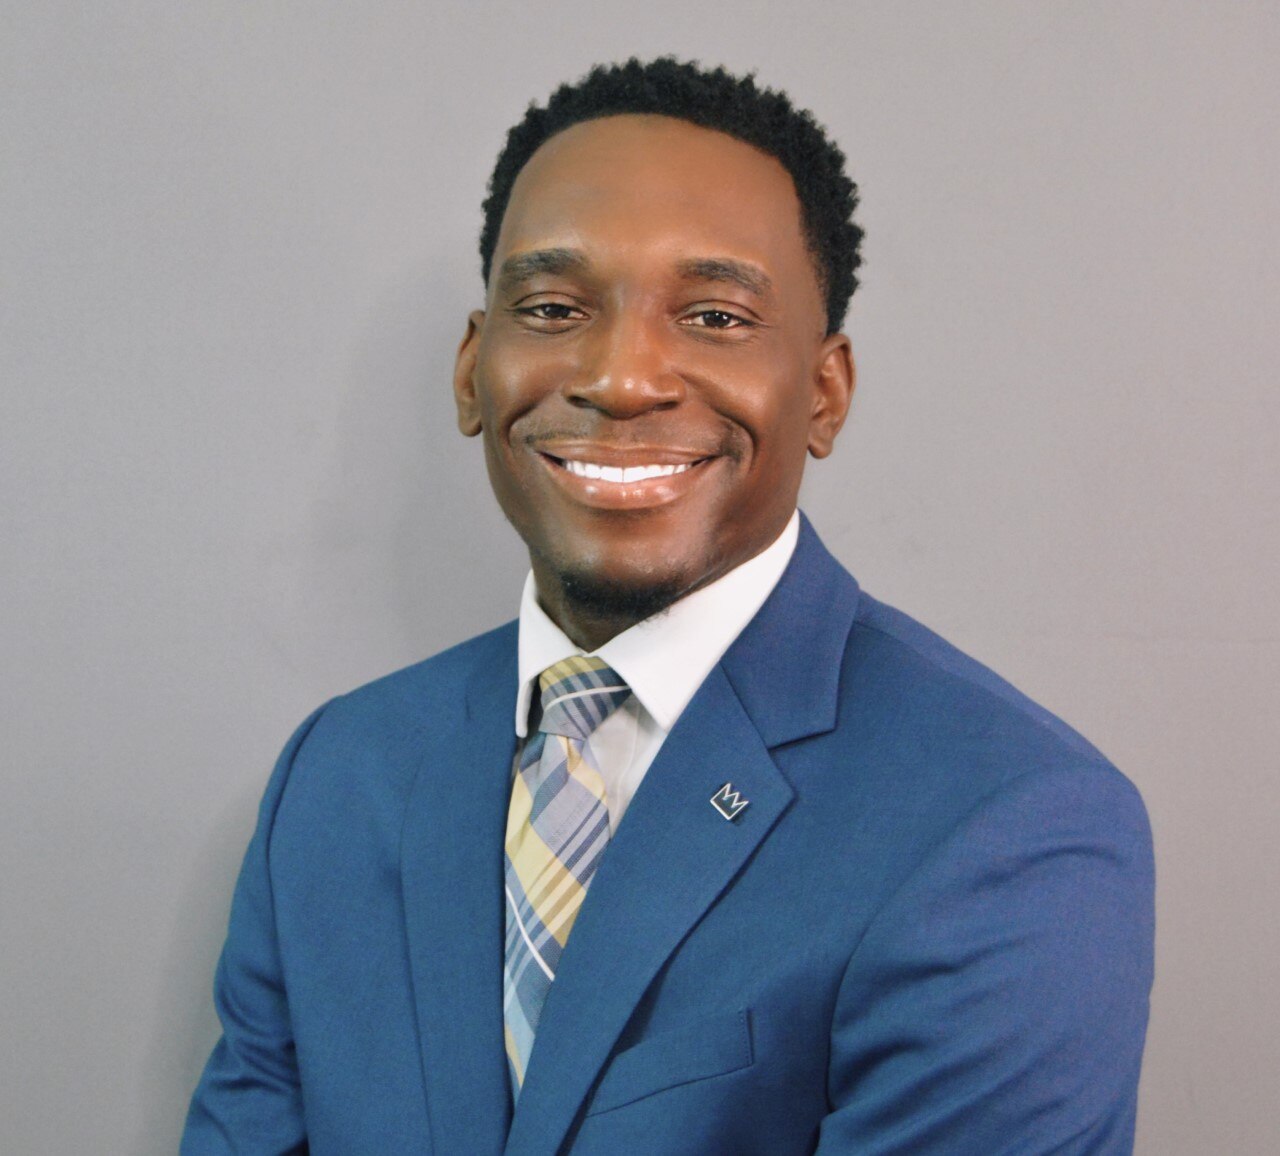 JARED LAMONT HOLMES Financial Professional & Insurance Agent